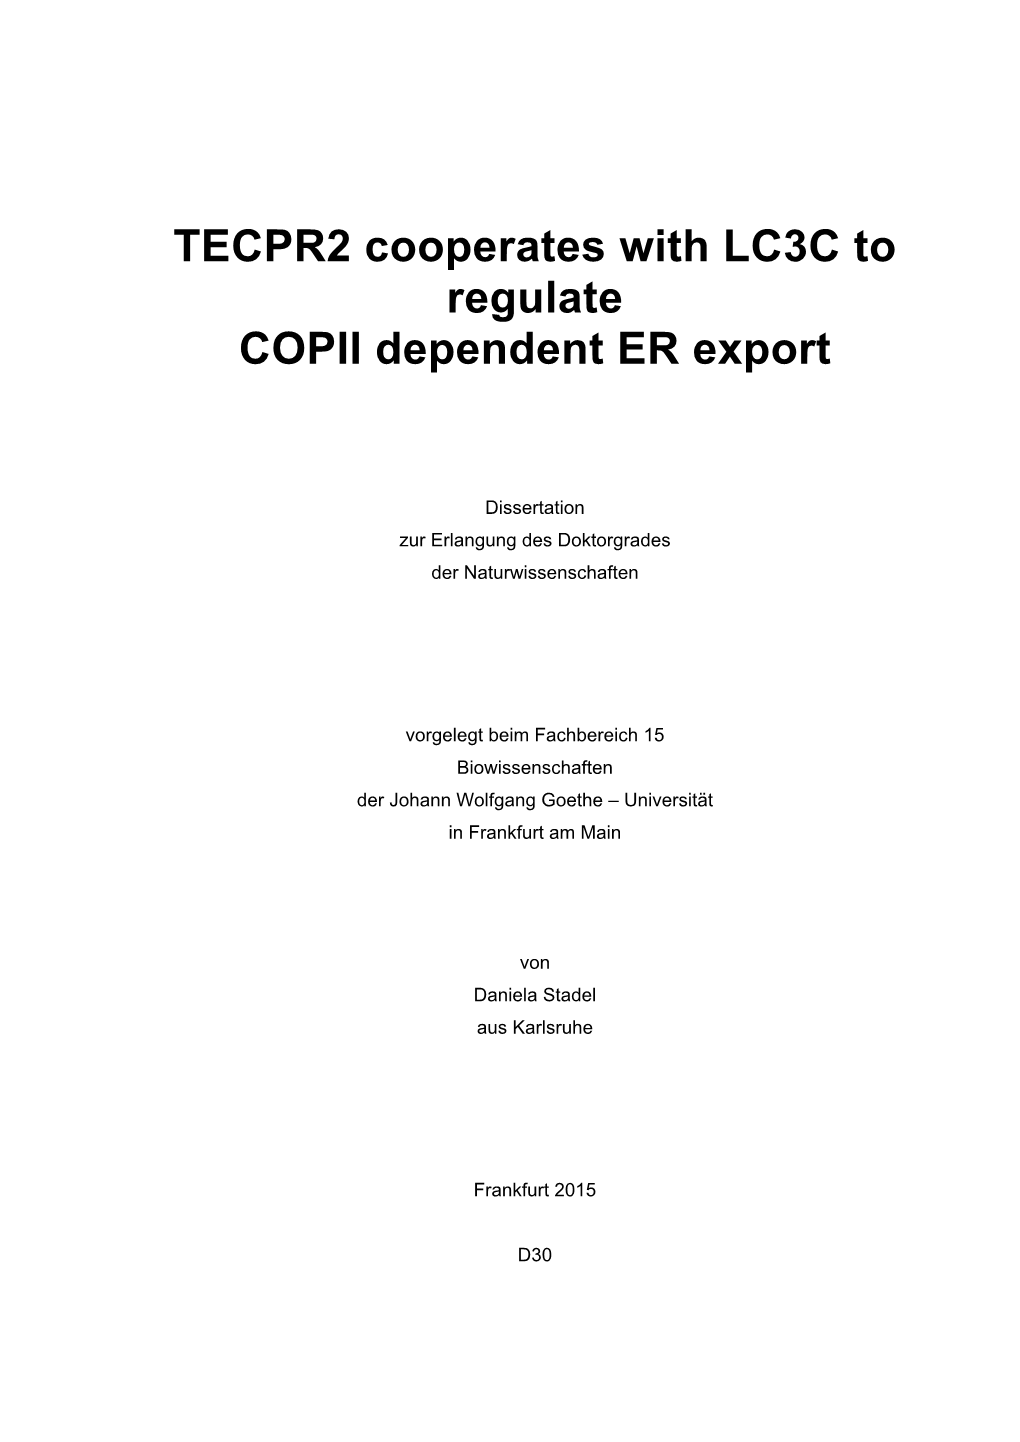 TECPR2 Cooperates with LC3C to Regulate COPII Dependent ER Export